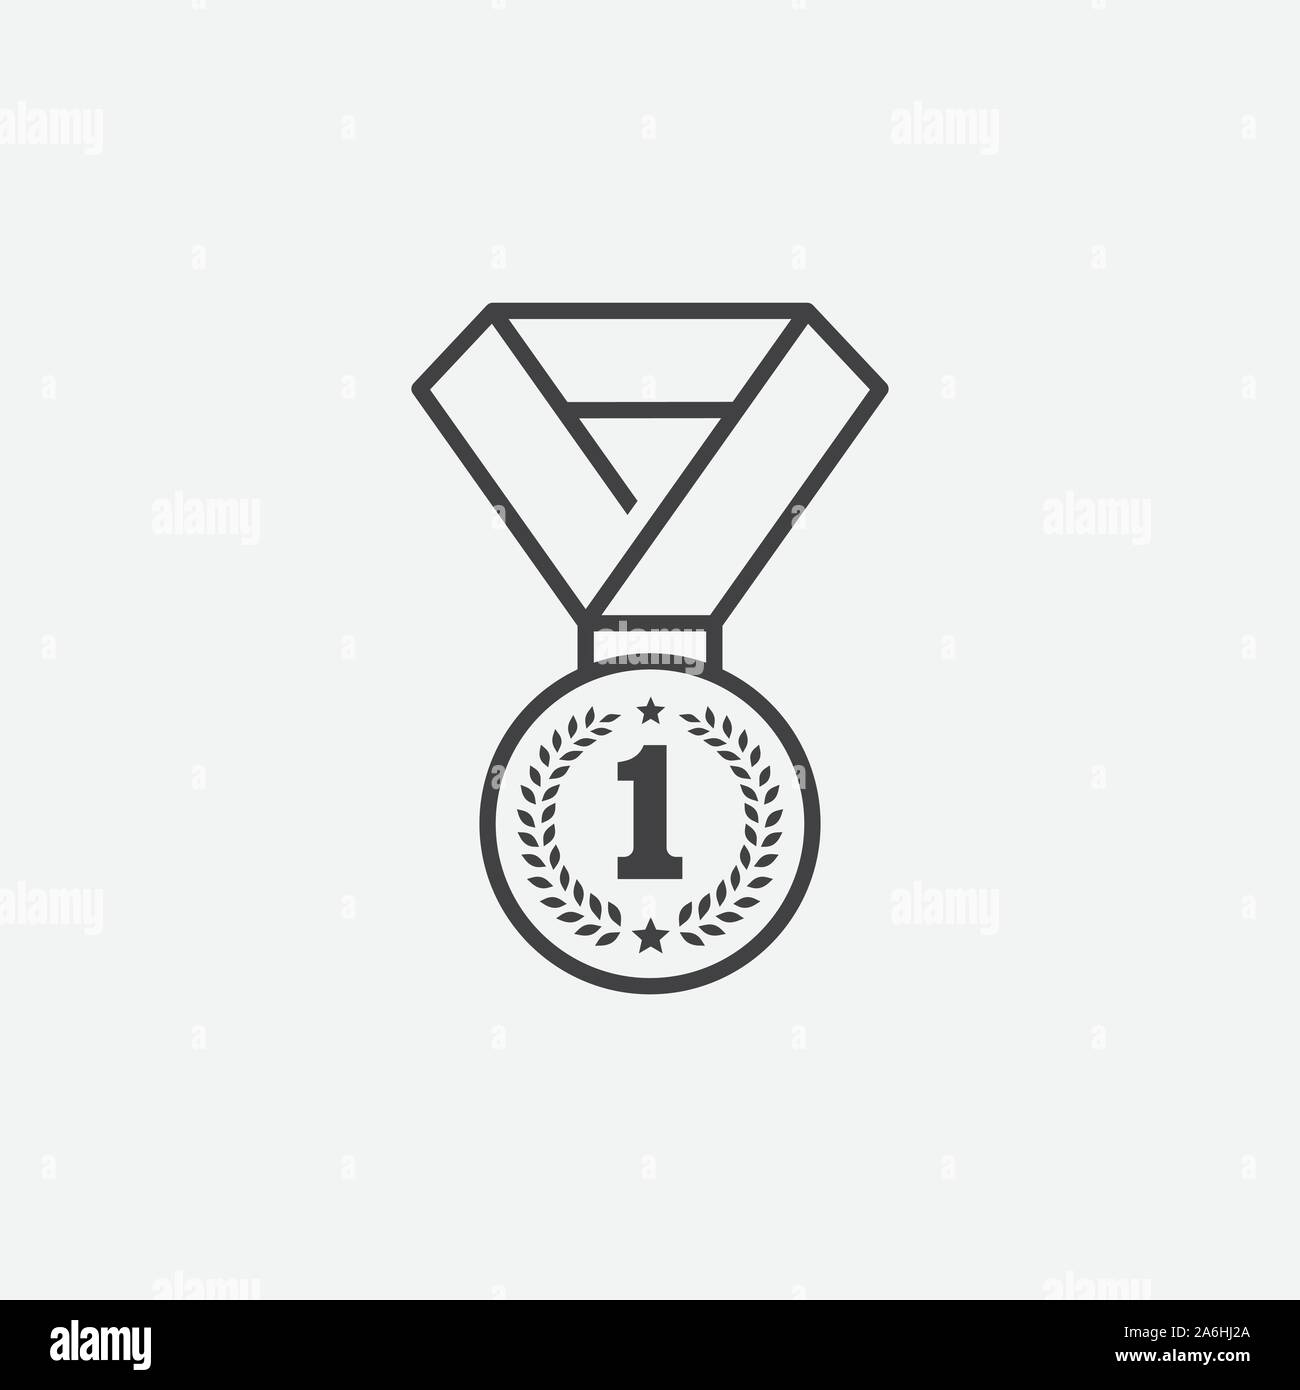 medal logo Template vector illustration icon design in linear style, medal for first place icon, medal flat icon illustration, champions medal icon illustration, award logo Stock Vector